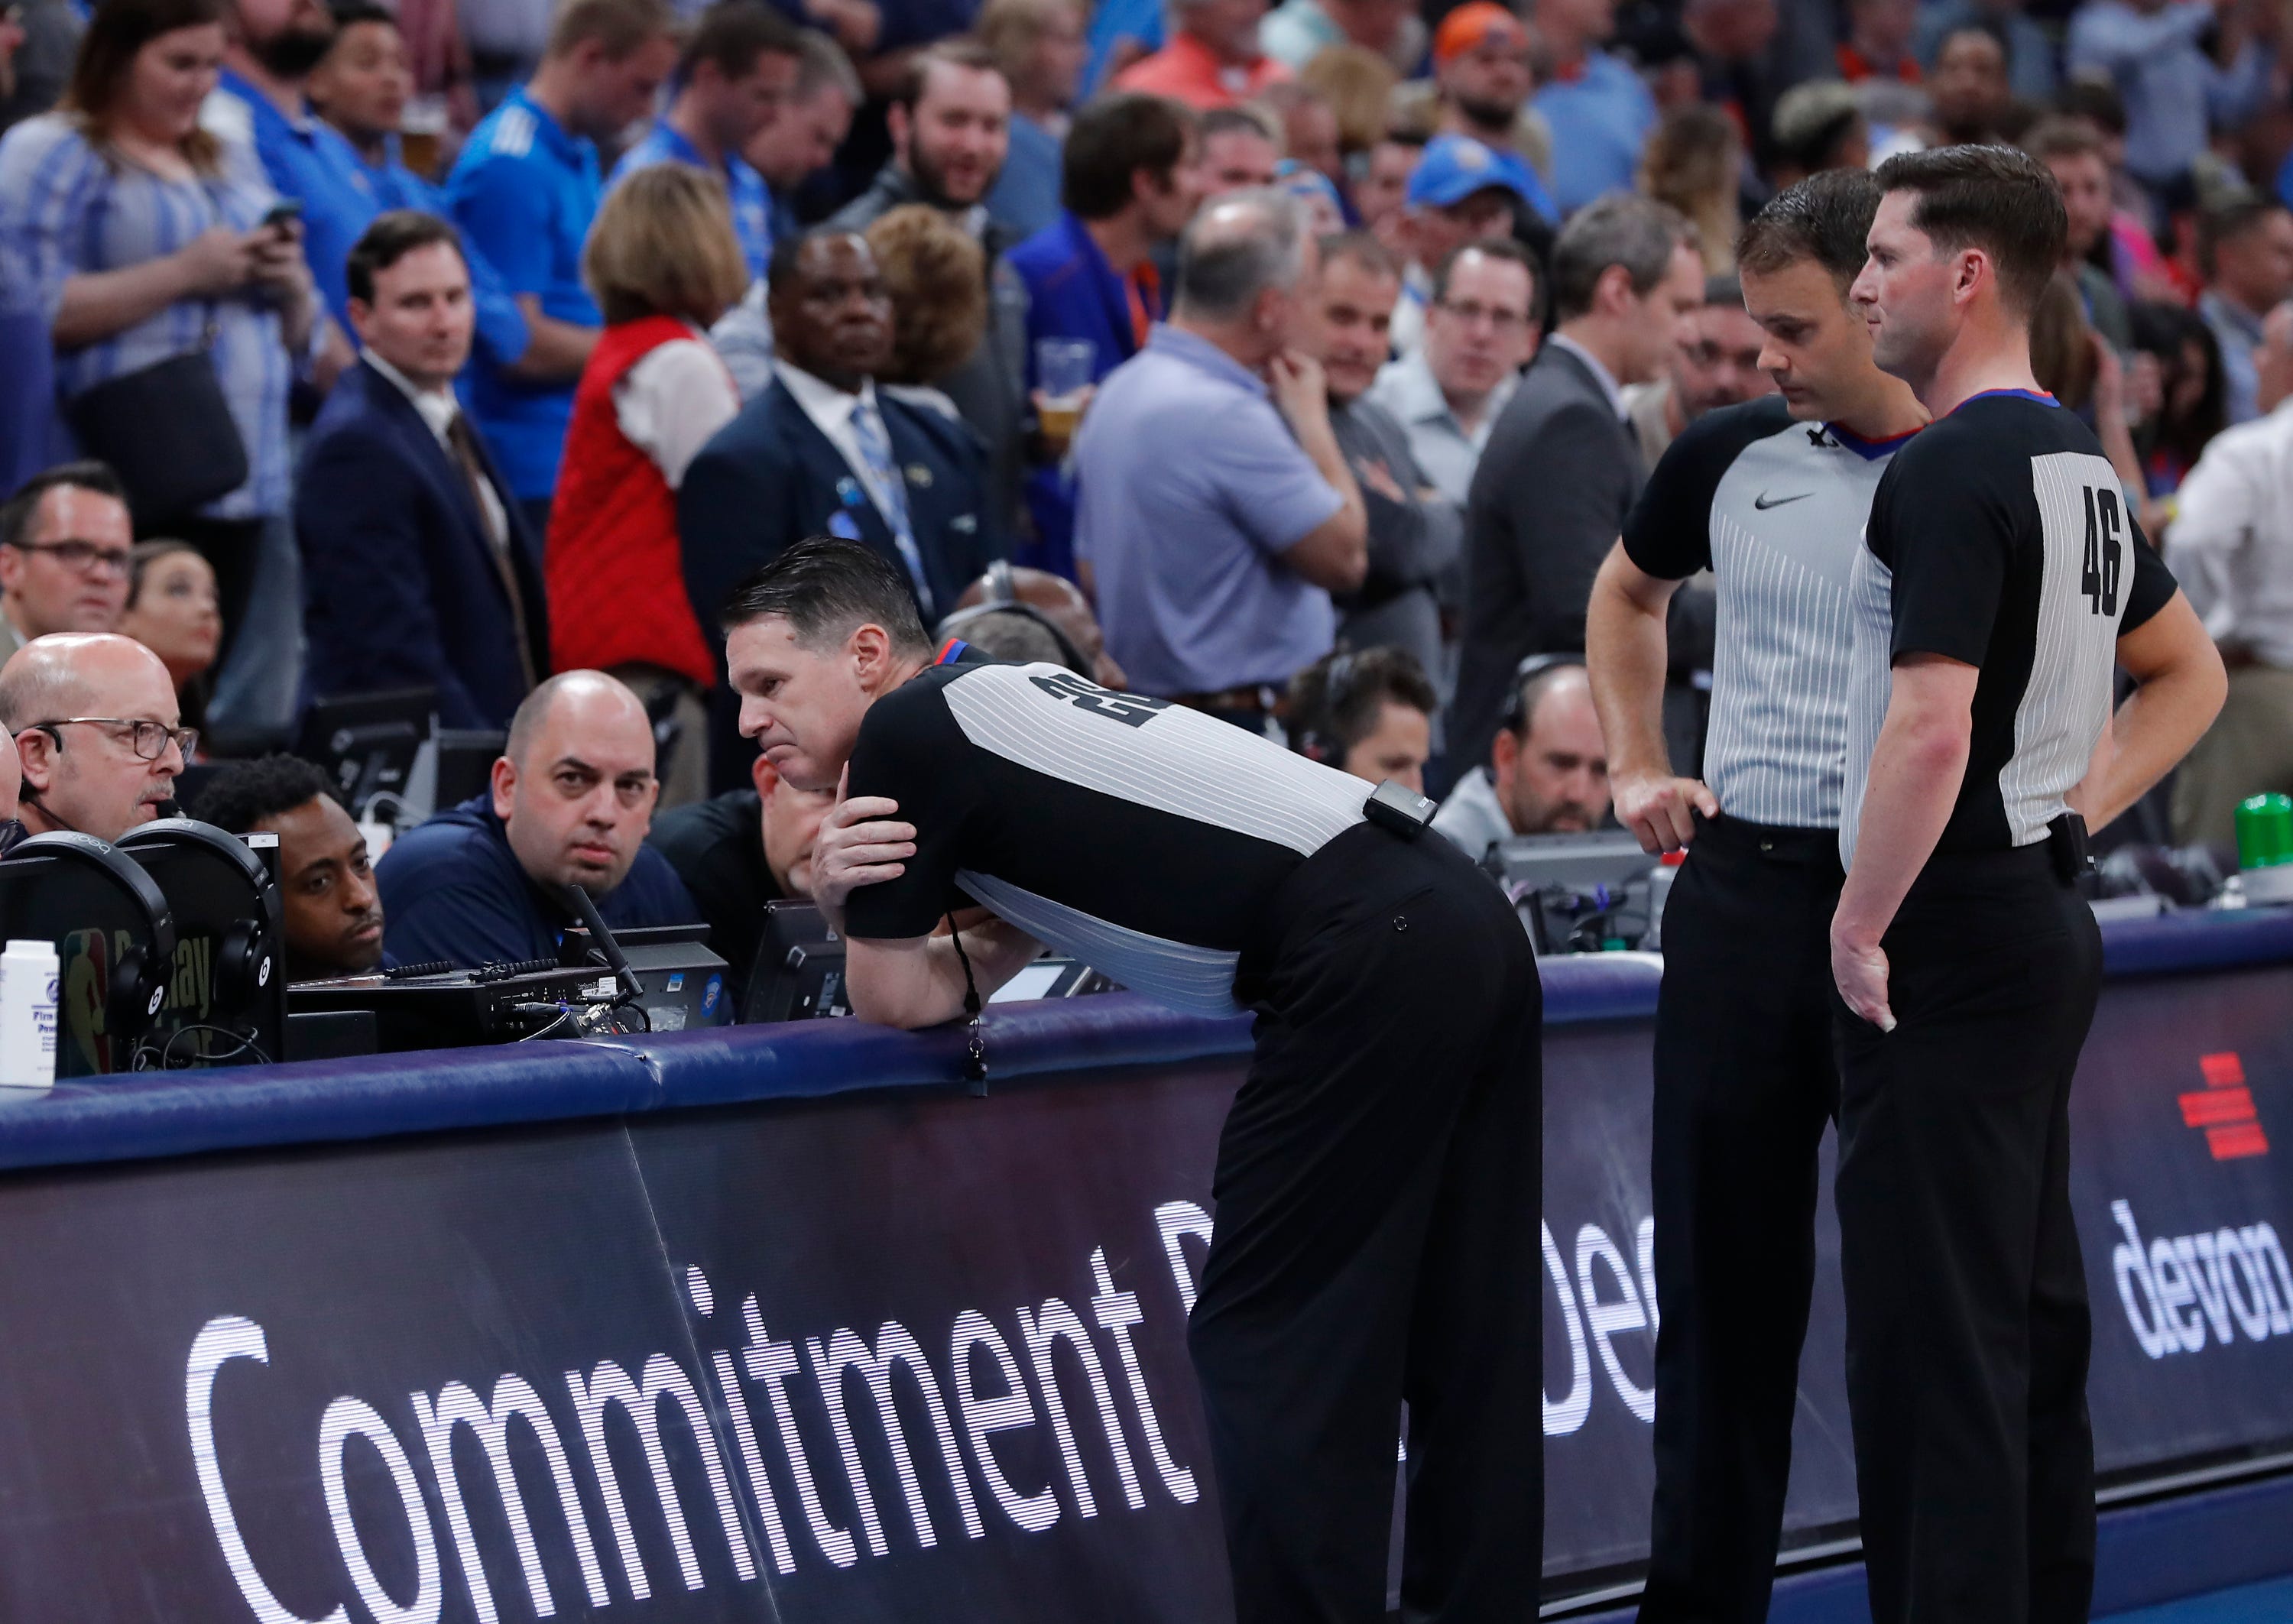 The NBA referees, including Mark Lindsay, stand at the scorer's table while awaiting instructions from the league after sending both the Jazz and Thunder to their locker rooms before tip off.